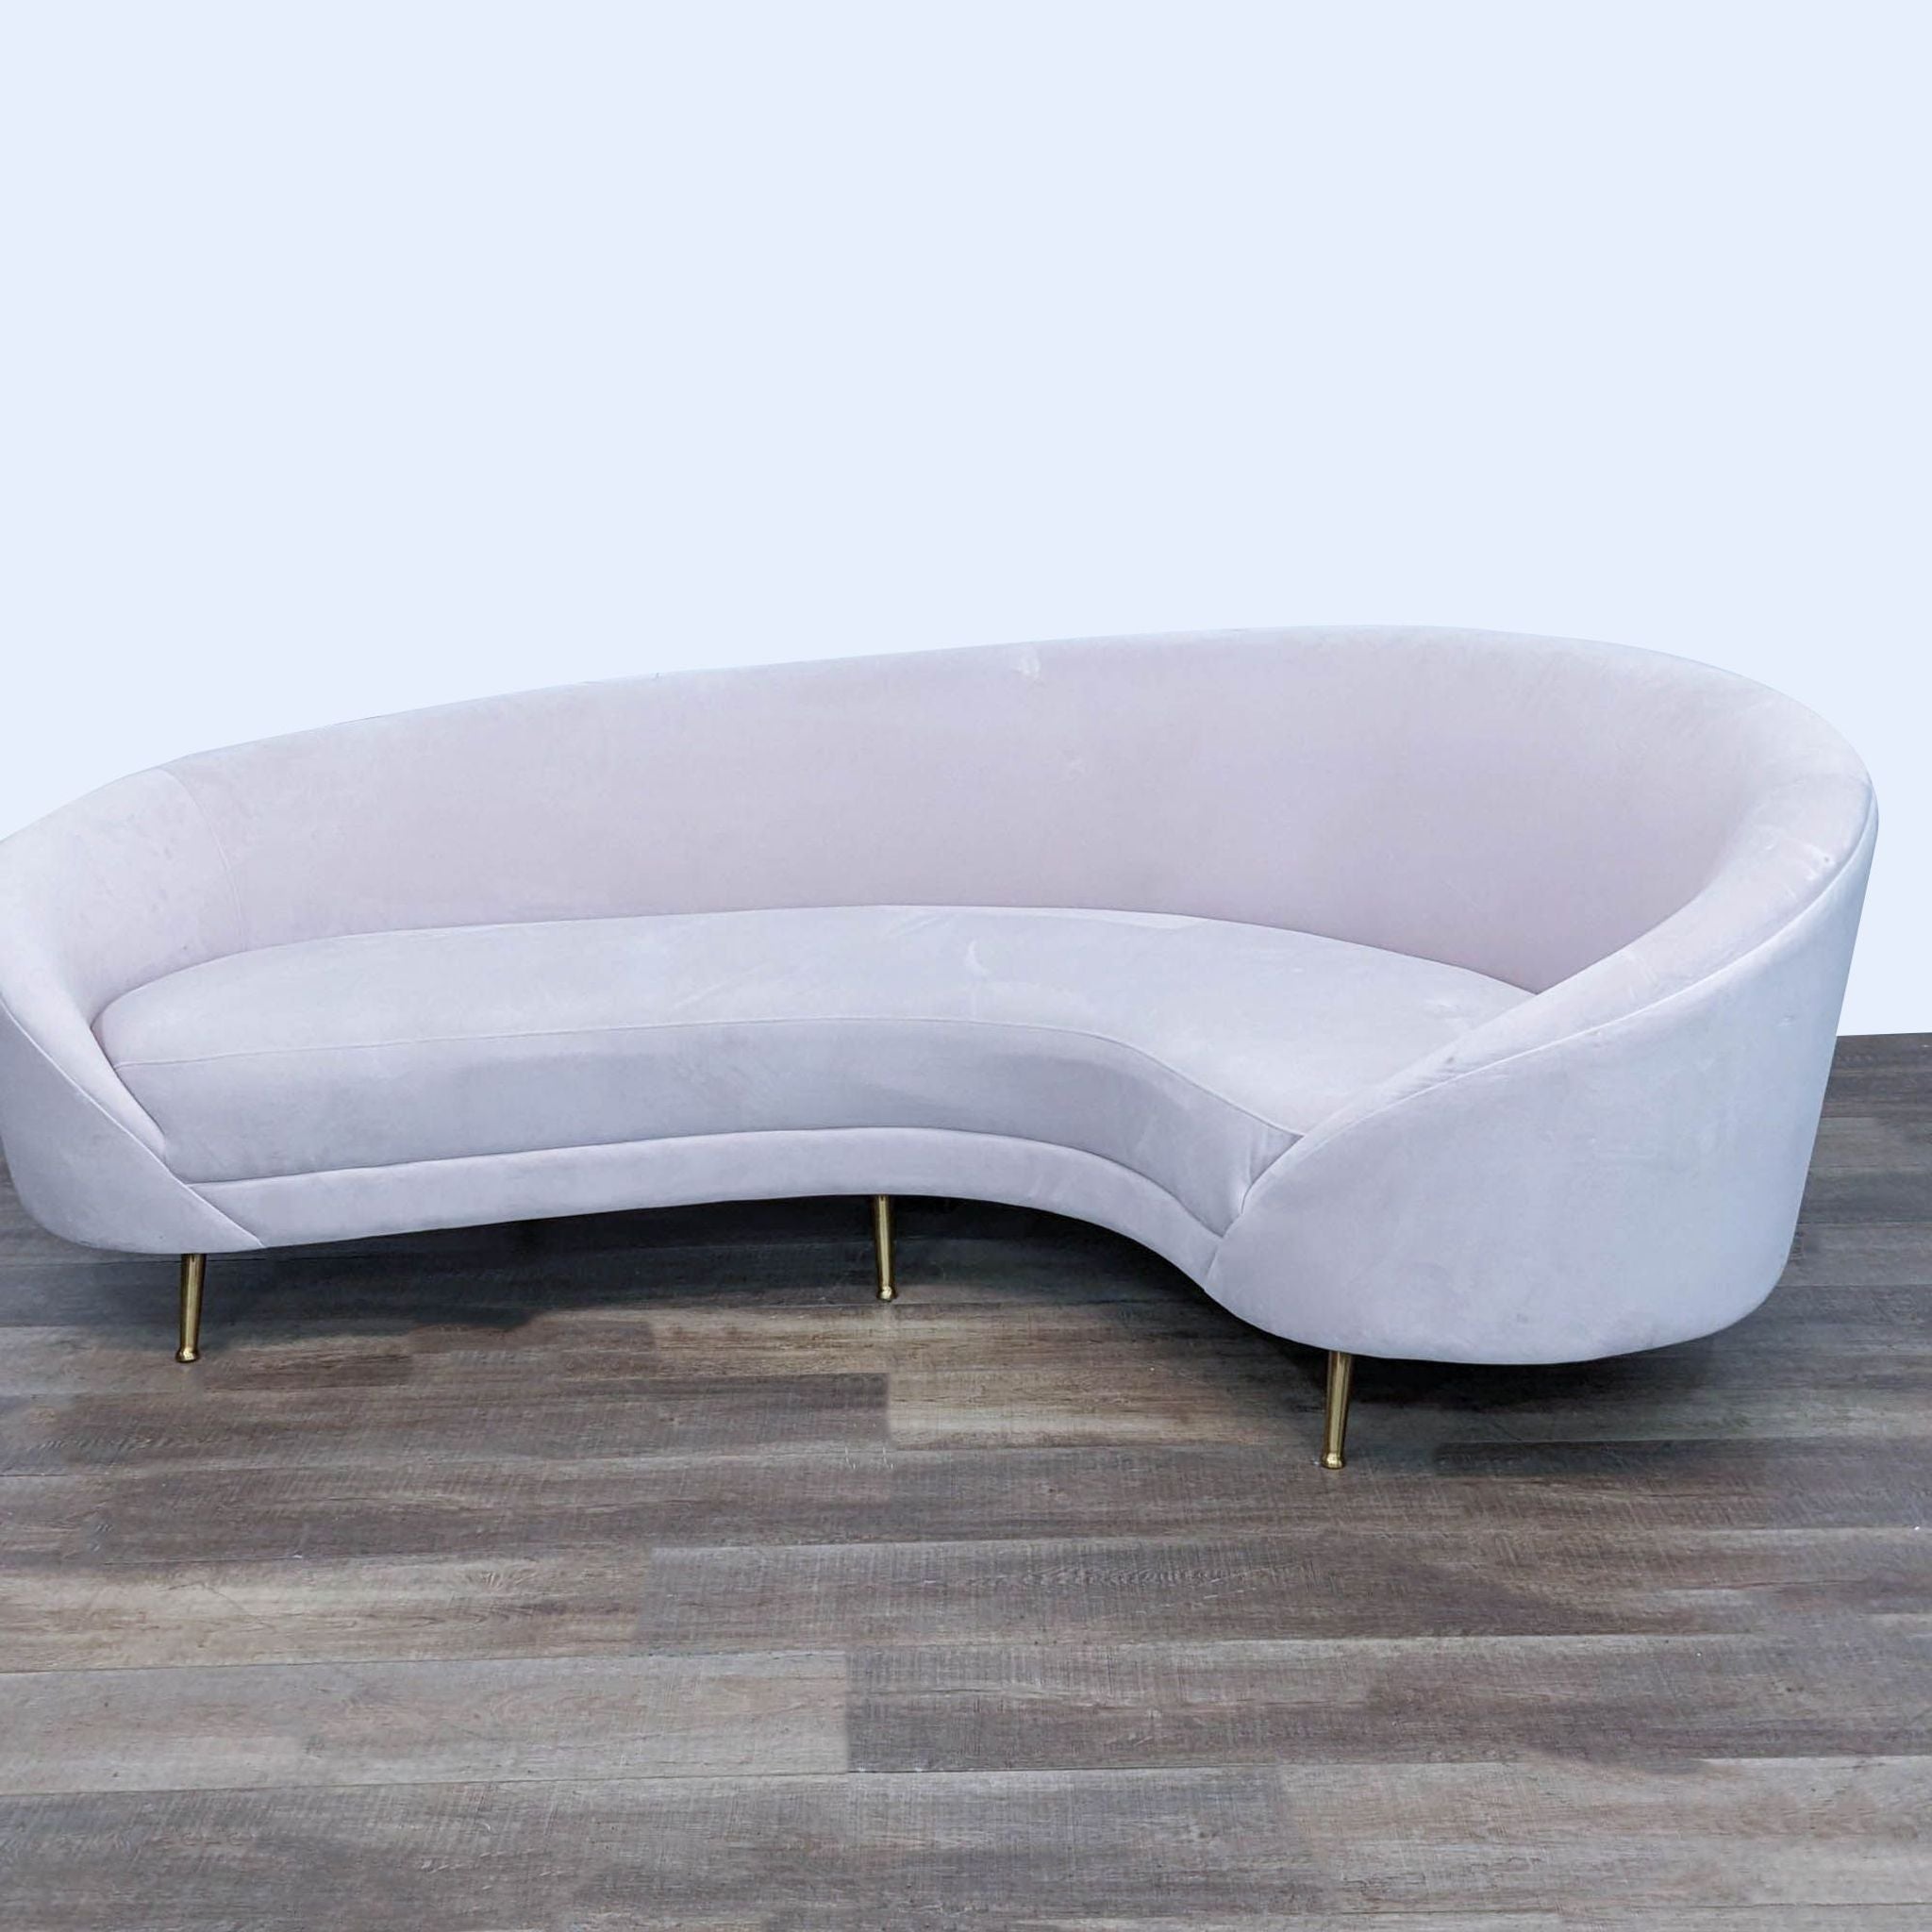 2. Hollywood Vibe curved white sofa designed for three people, featuring a sleek design and gold feet against a wood-patterned background.